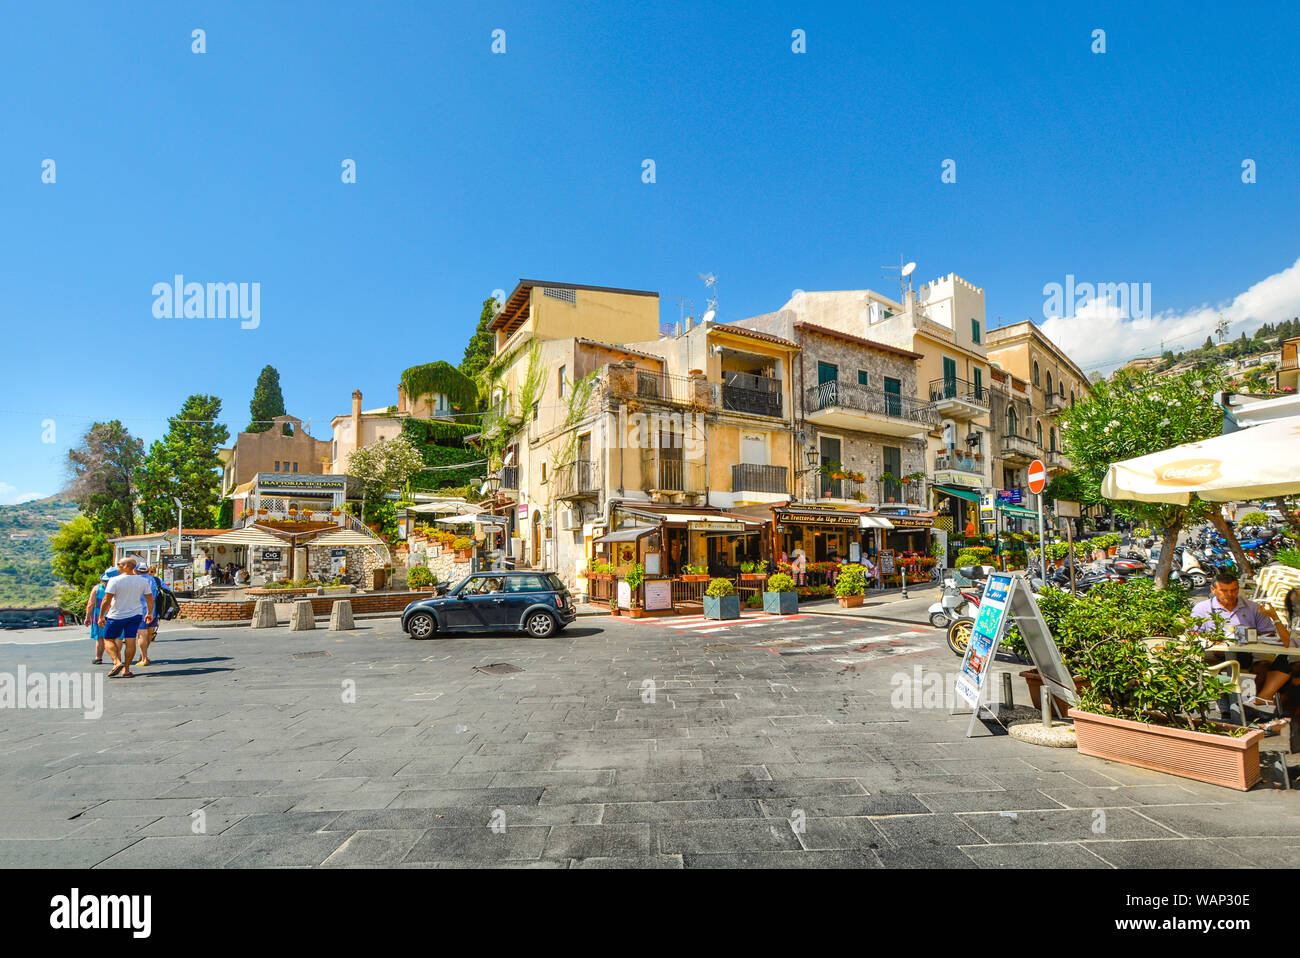 Busy corner with cafes and shops at the end of the main street, Corso Umberto, in the Sicilian city of Taormina Italy on a summer day Stock Photo